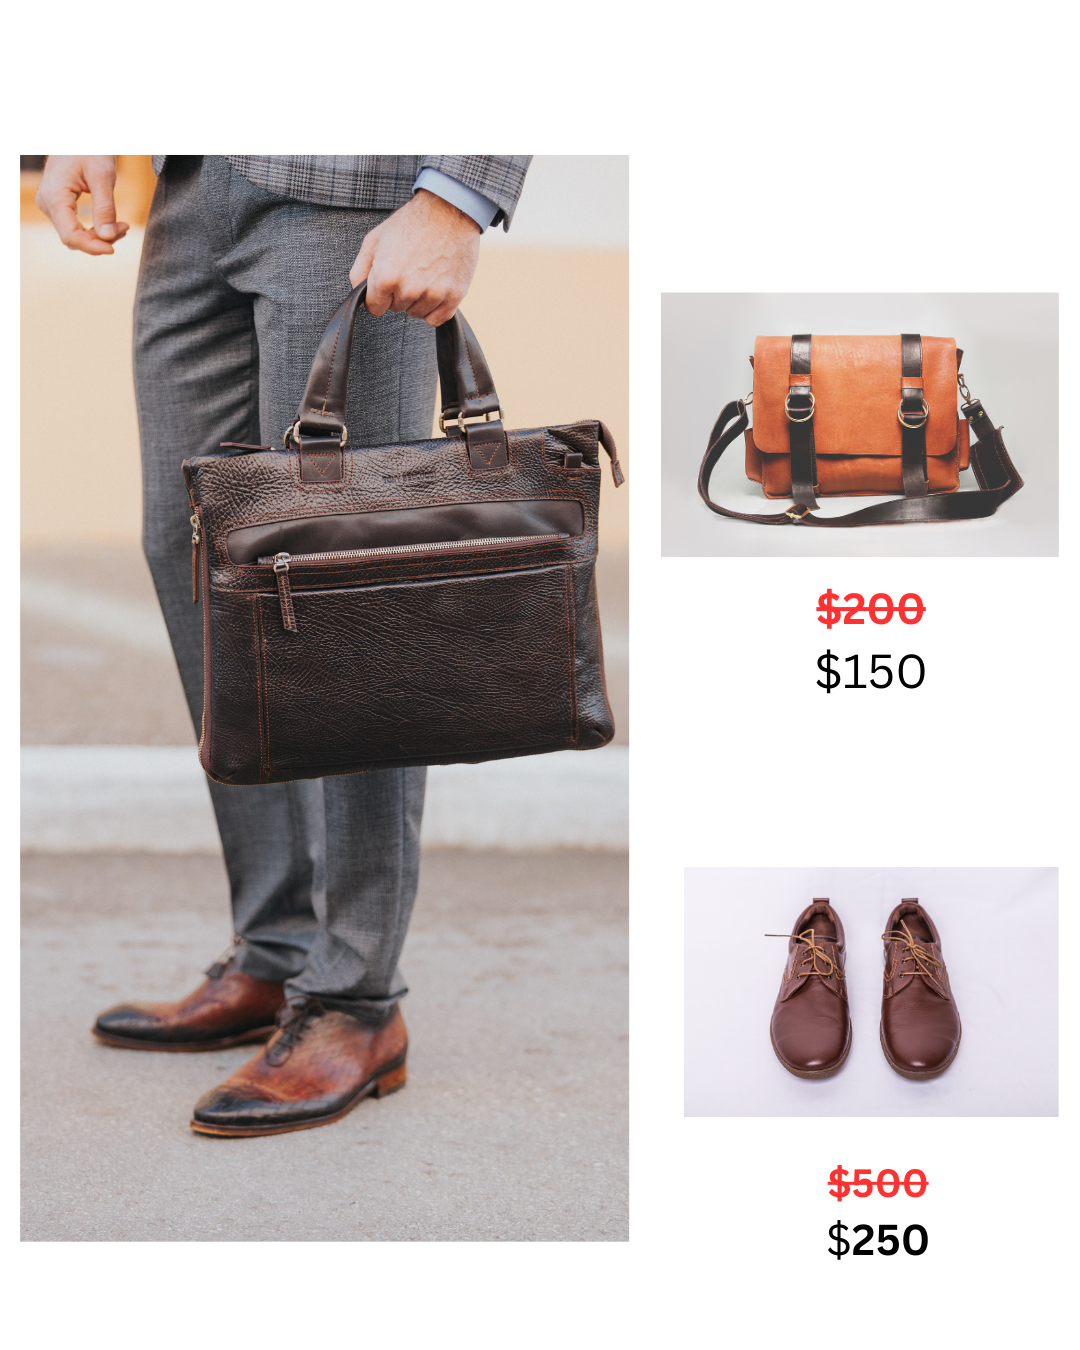 Man holding a brown bag. Left part of the image shows bags and shoes with discounts.